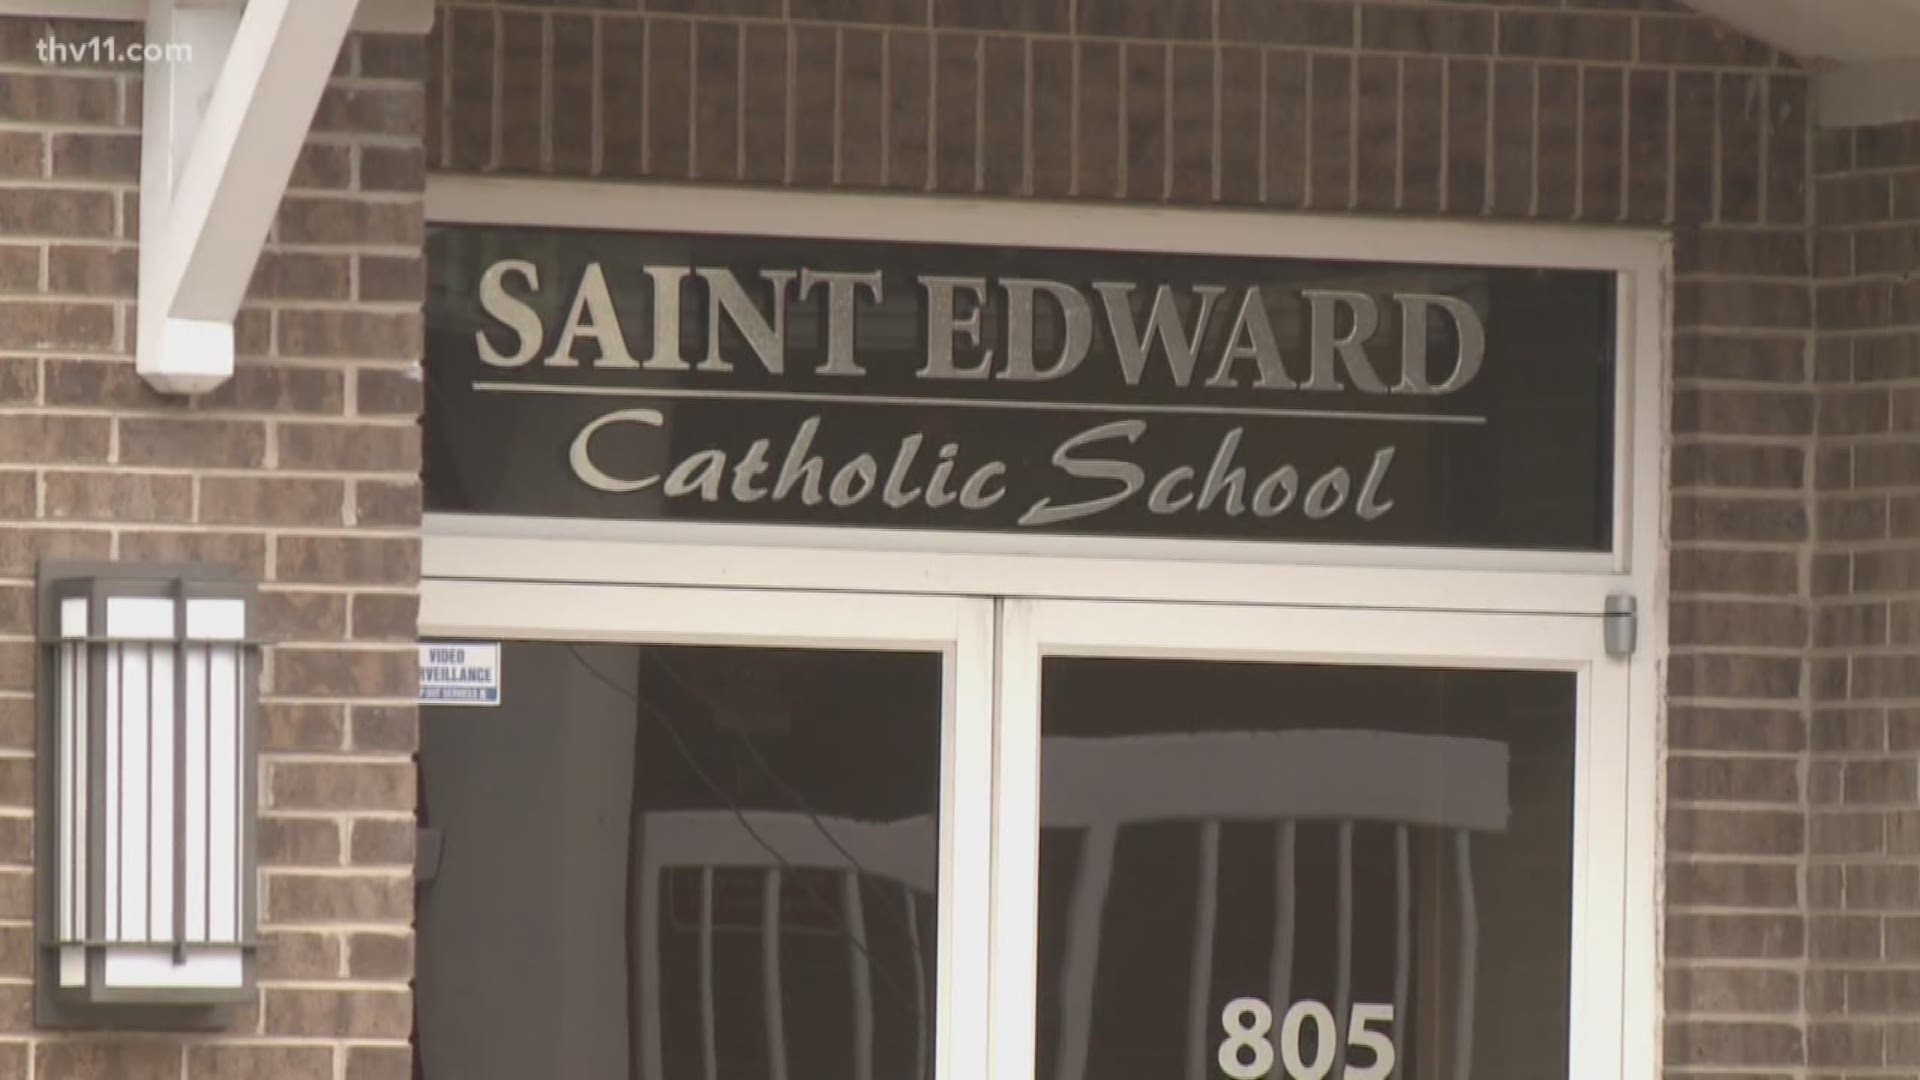 St. Edward Catholic School will close once this academic year ends in May.